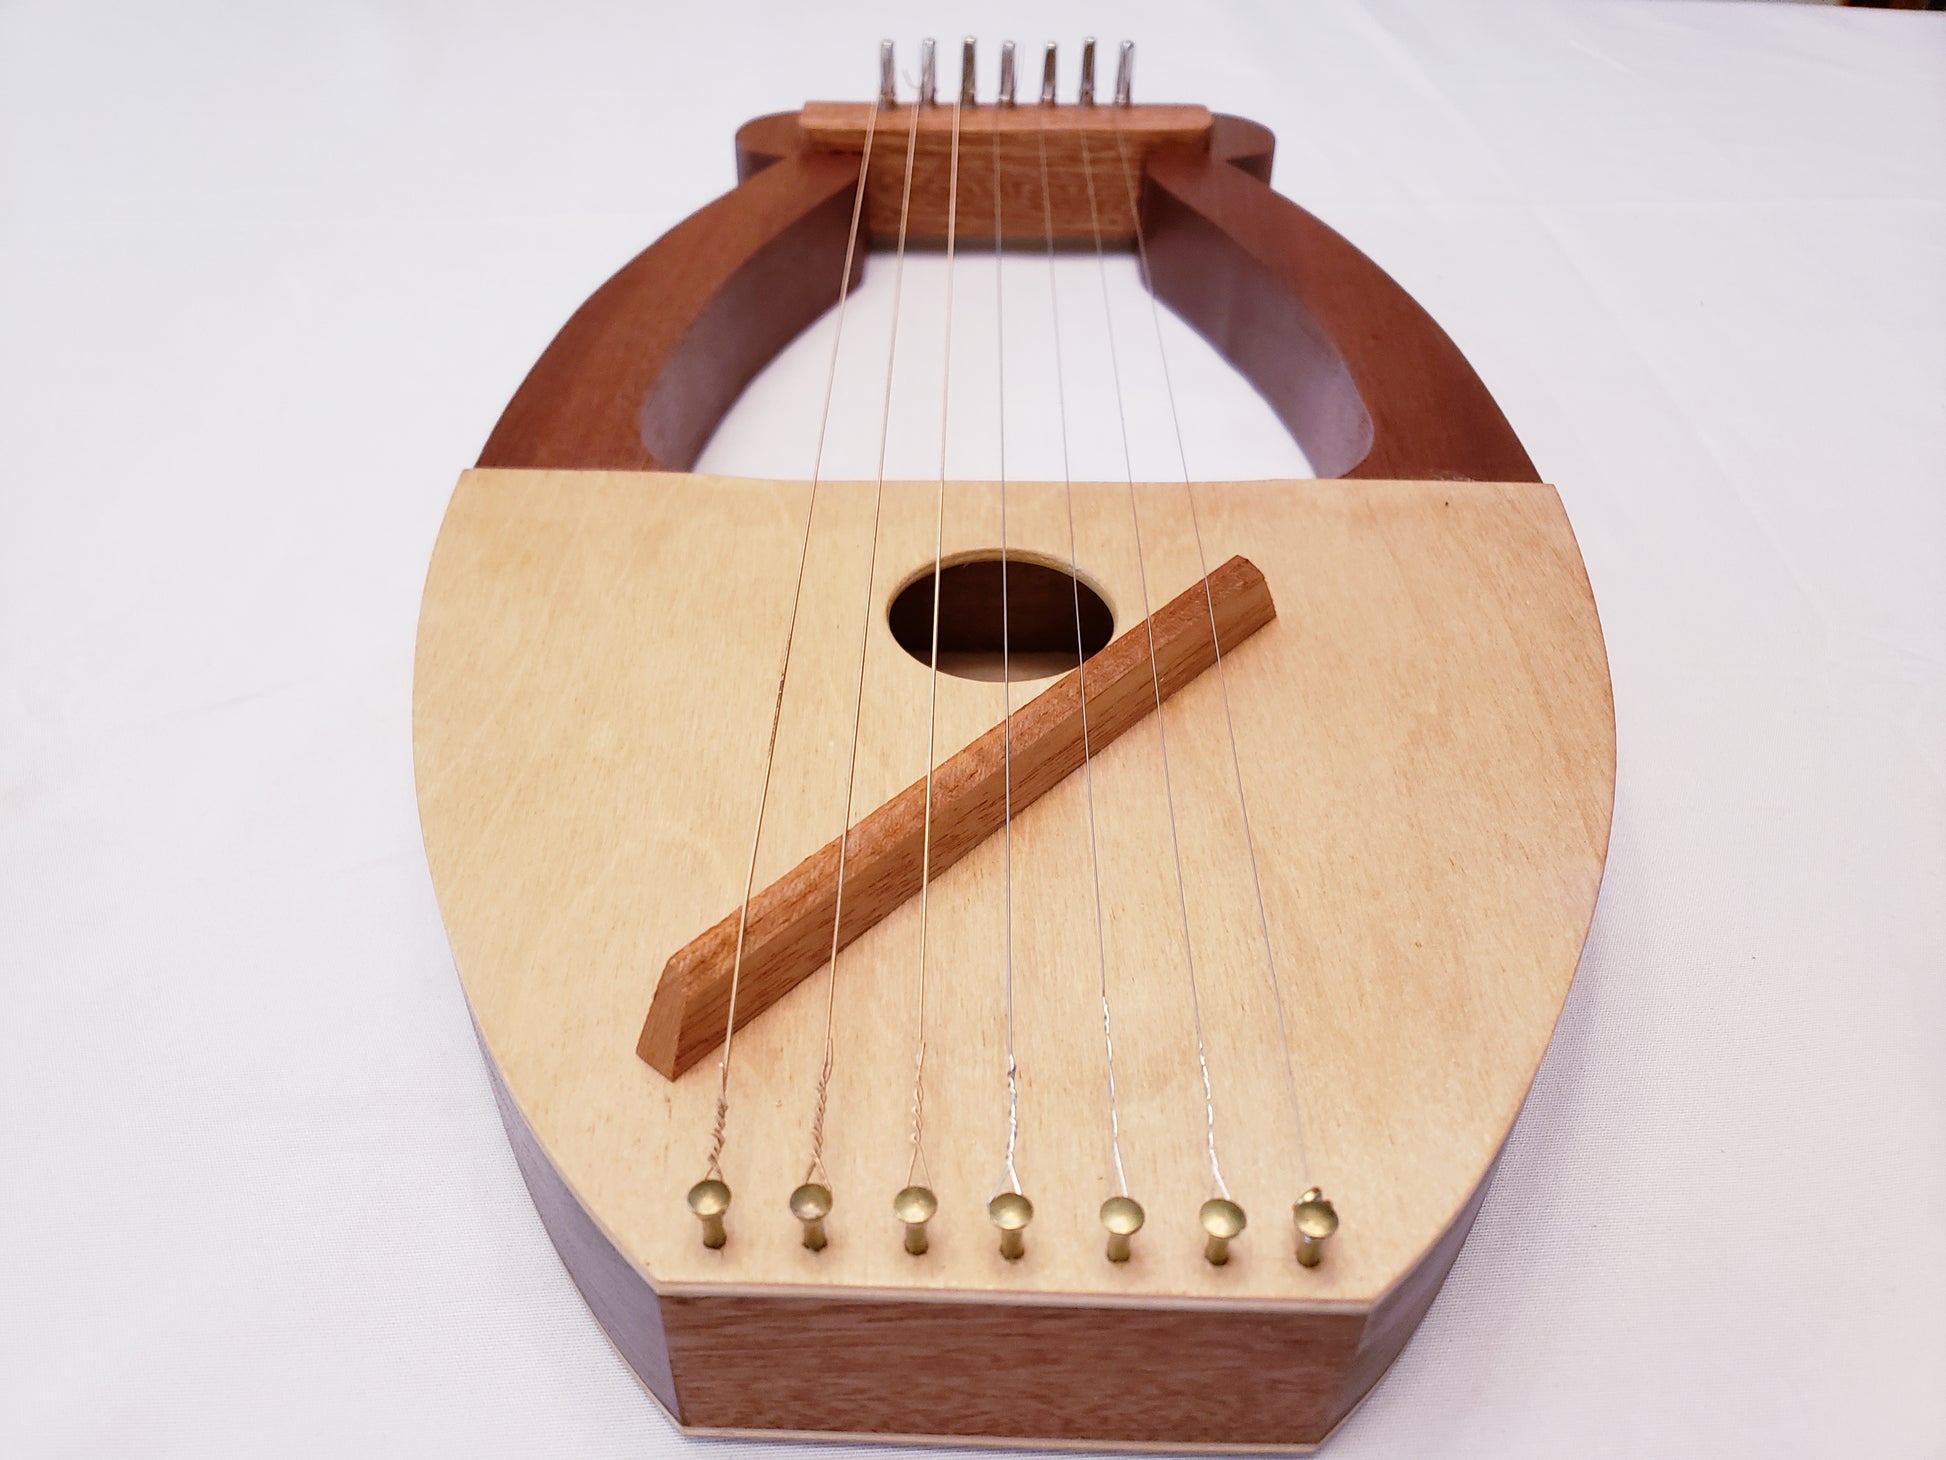 lyre with 7 strings: bottom view